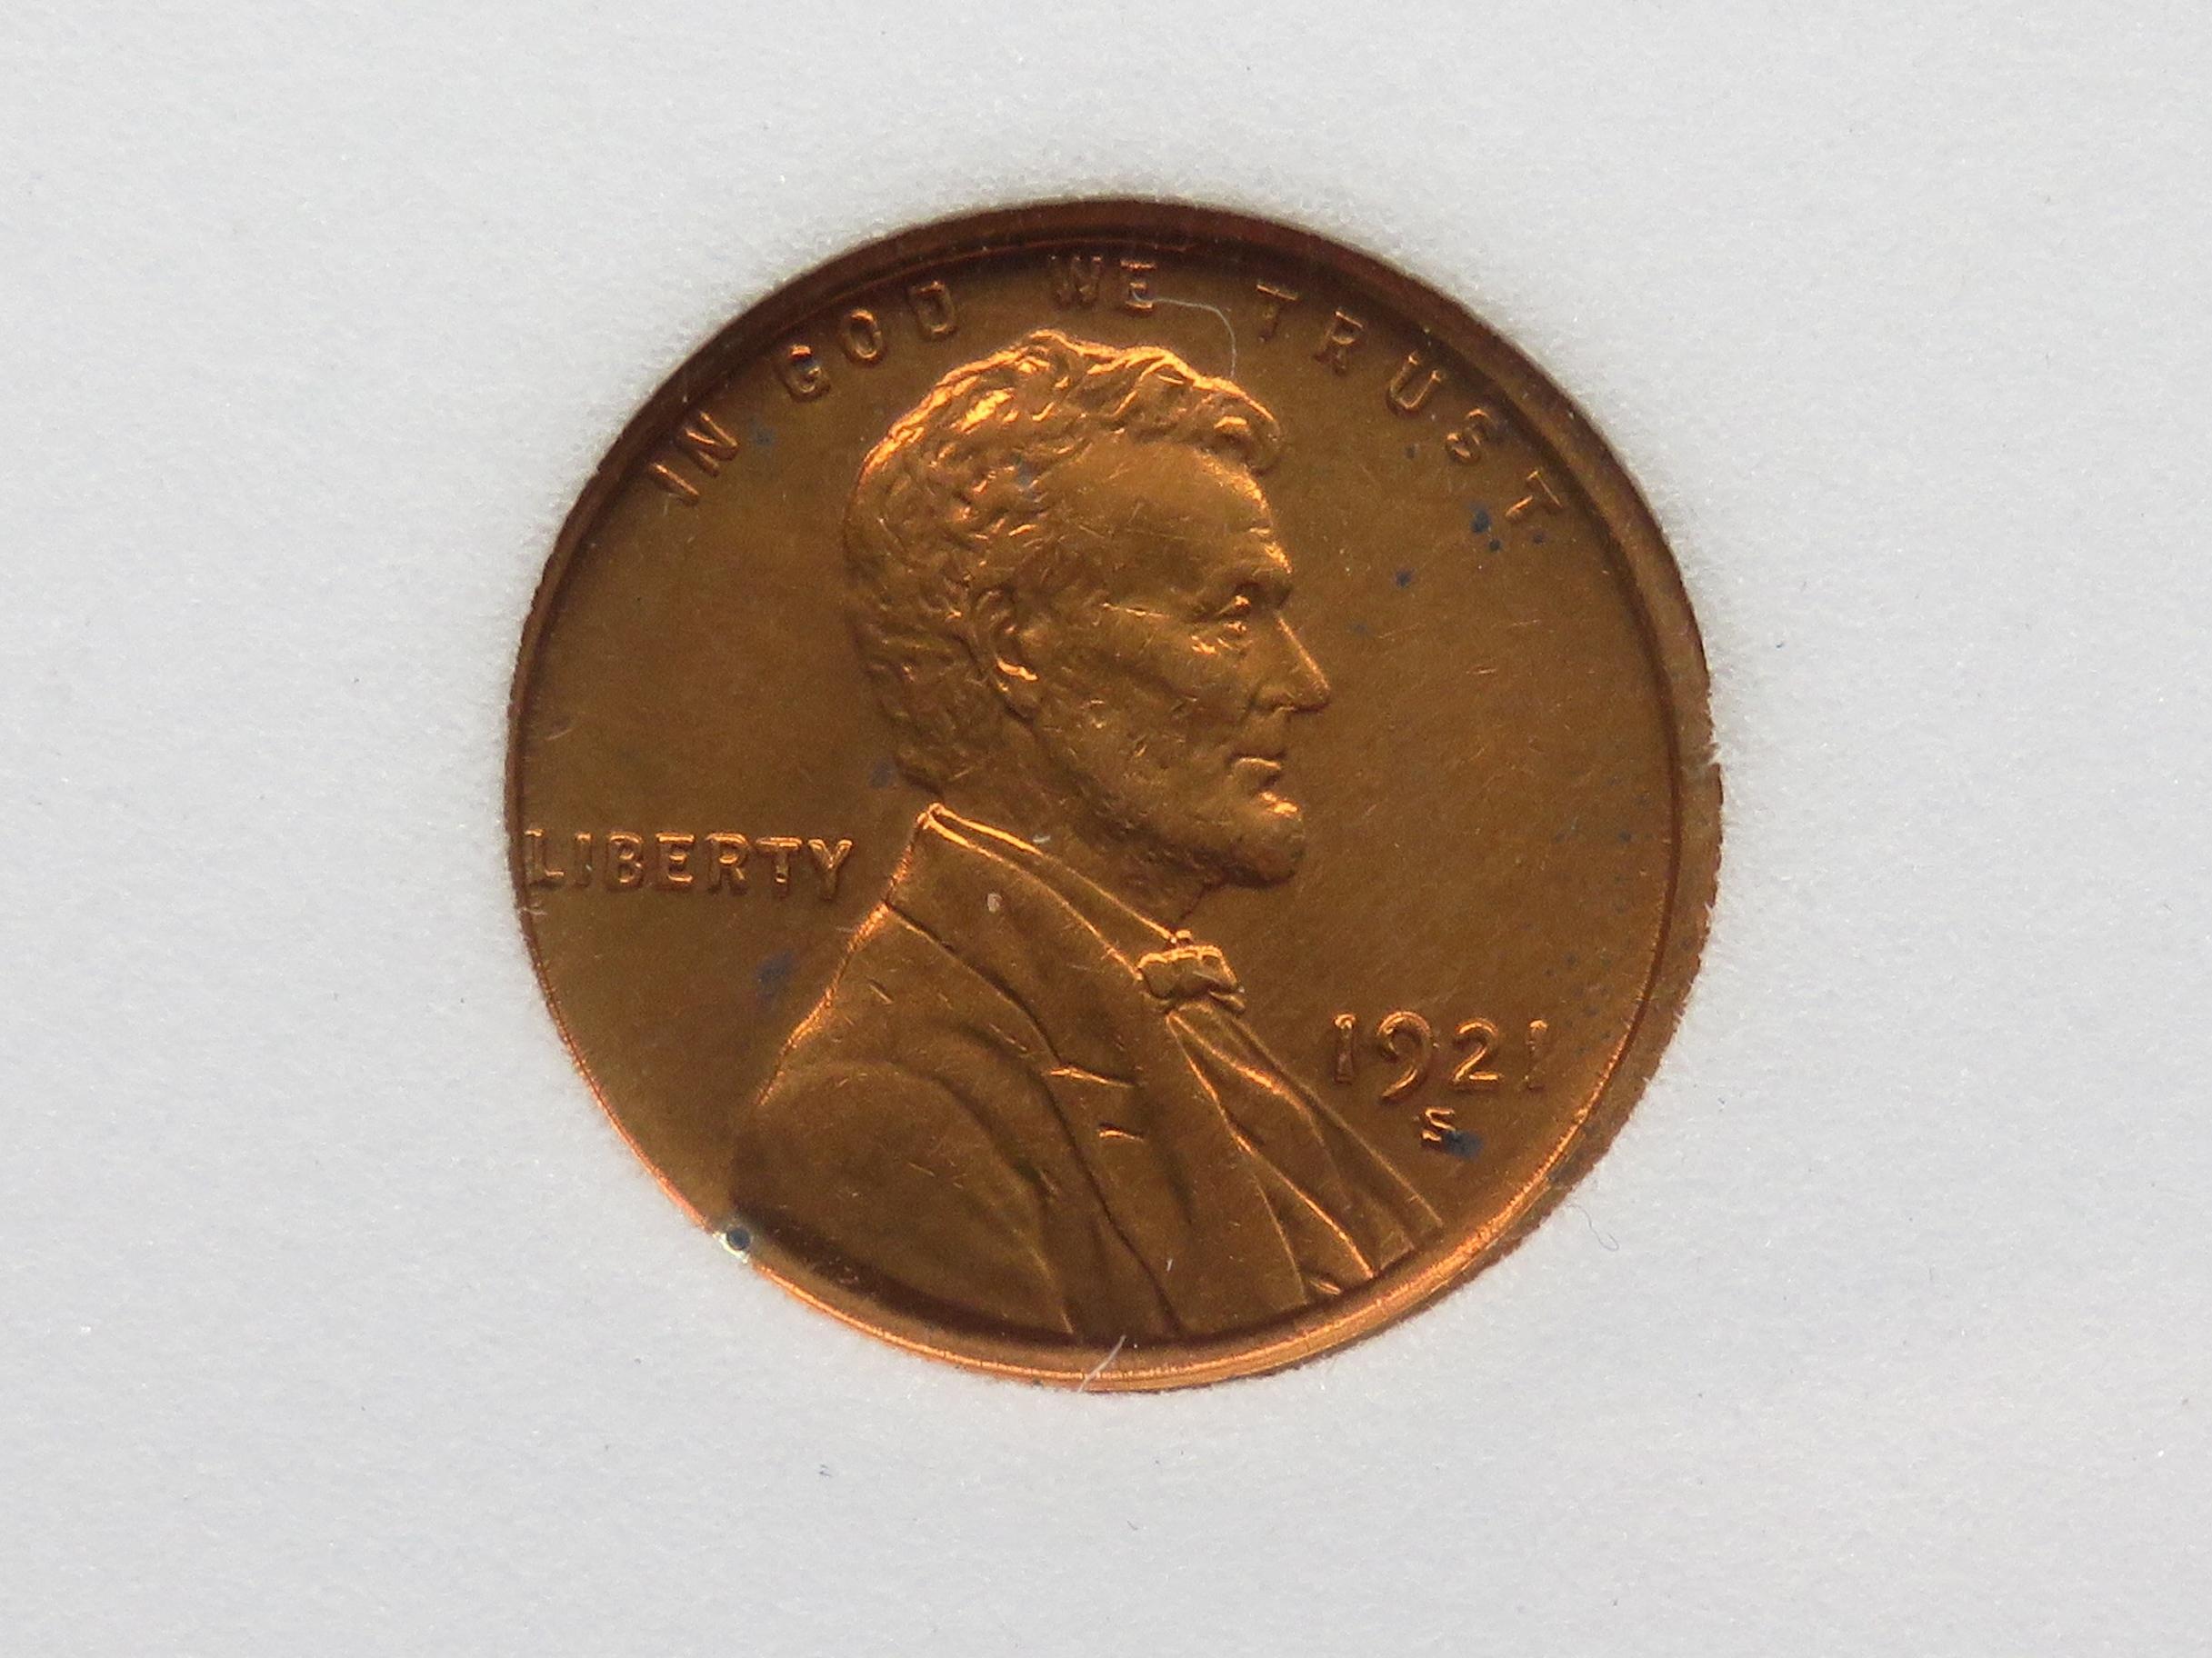 Lincoln Cent 1921S NNC MS63 RB